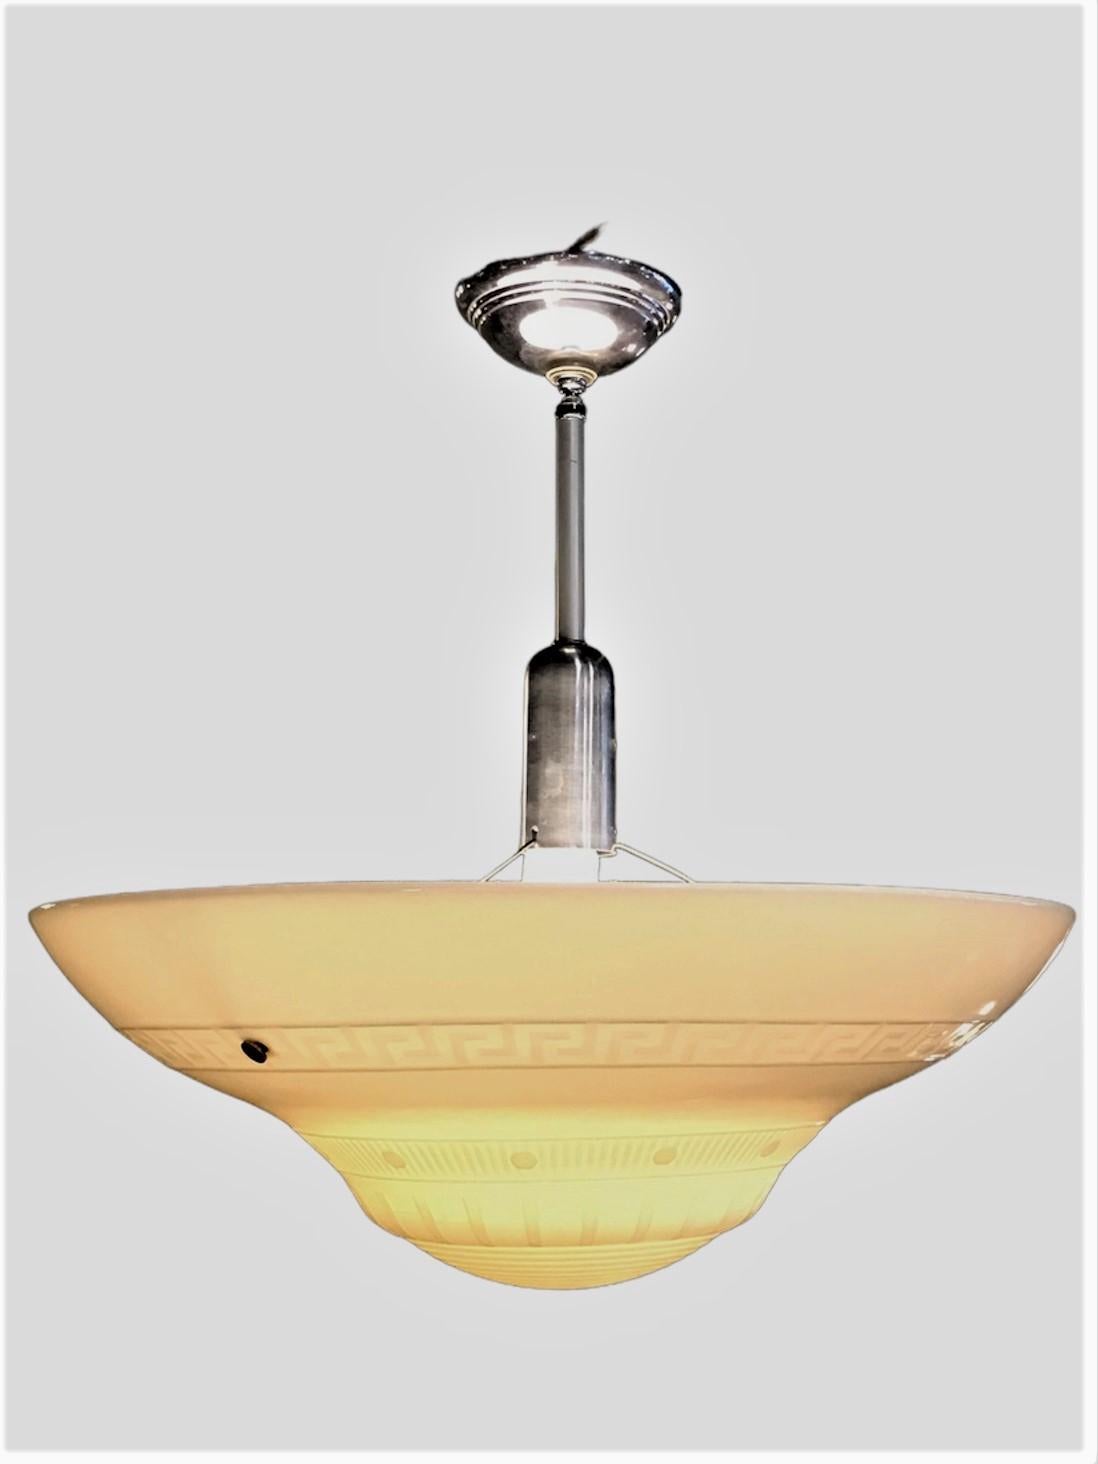 Sleek period Streamline Moderne Light featuring a wide conical thick milk glass bowl with concentric ribs on the bottom follow by bands of parallel lines and a wide Greek Key motif band (Meander). The glass shade suspended under a chromed bullet